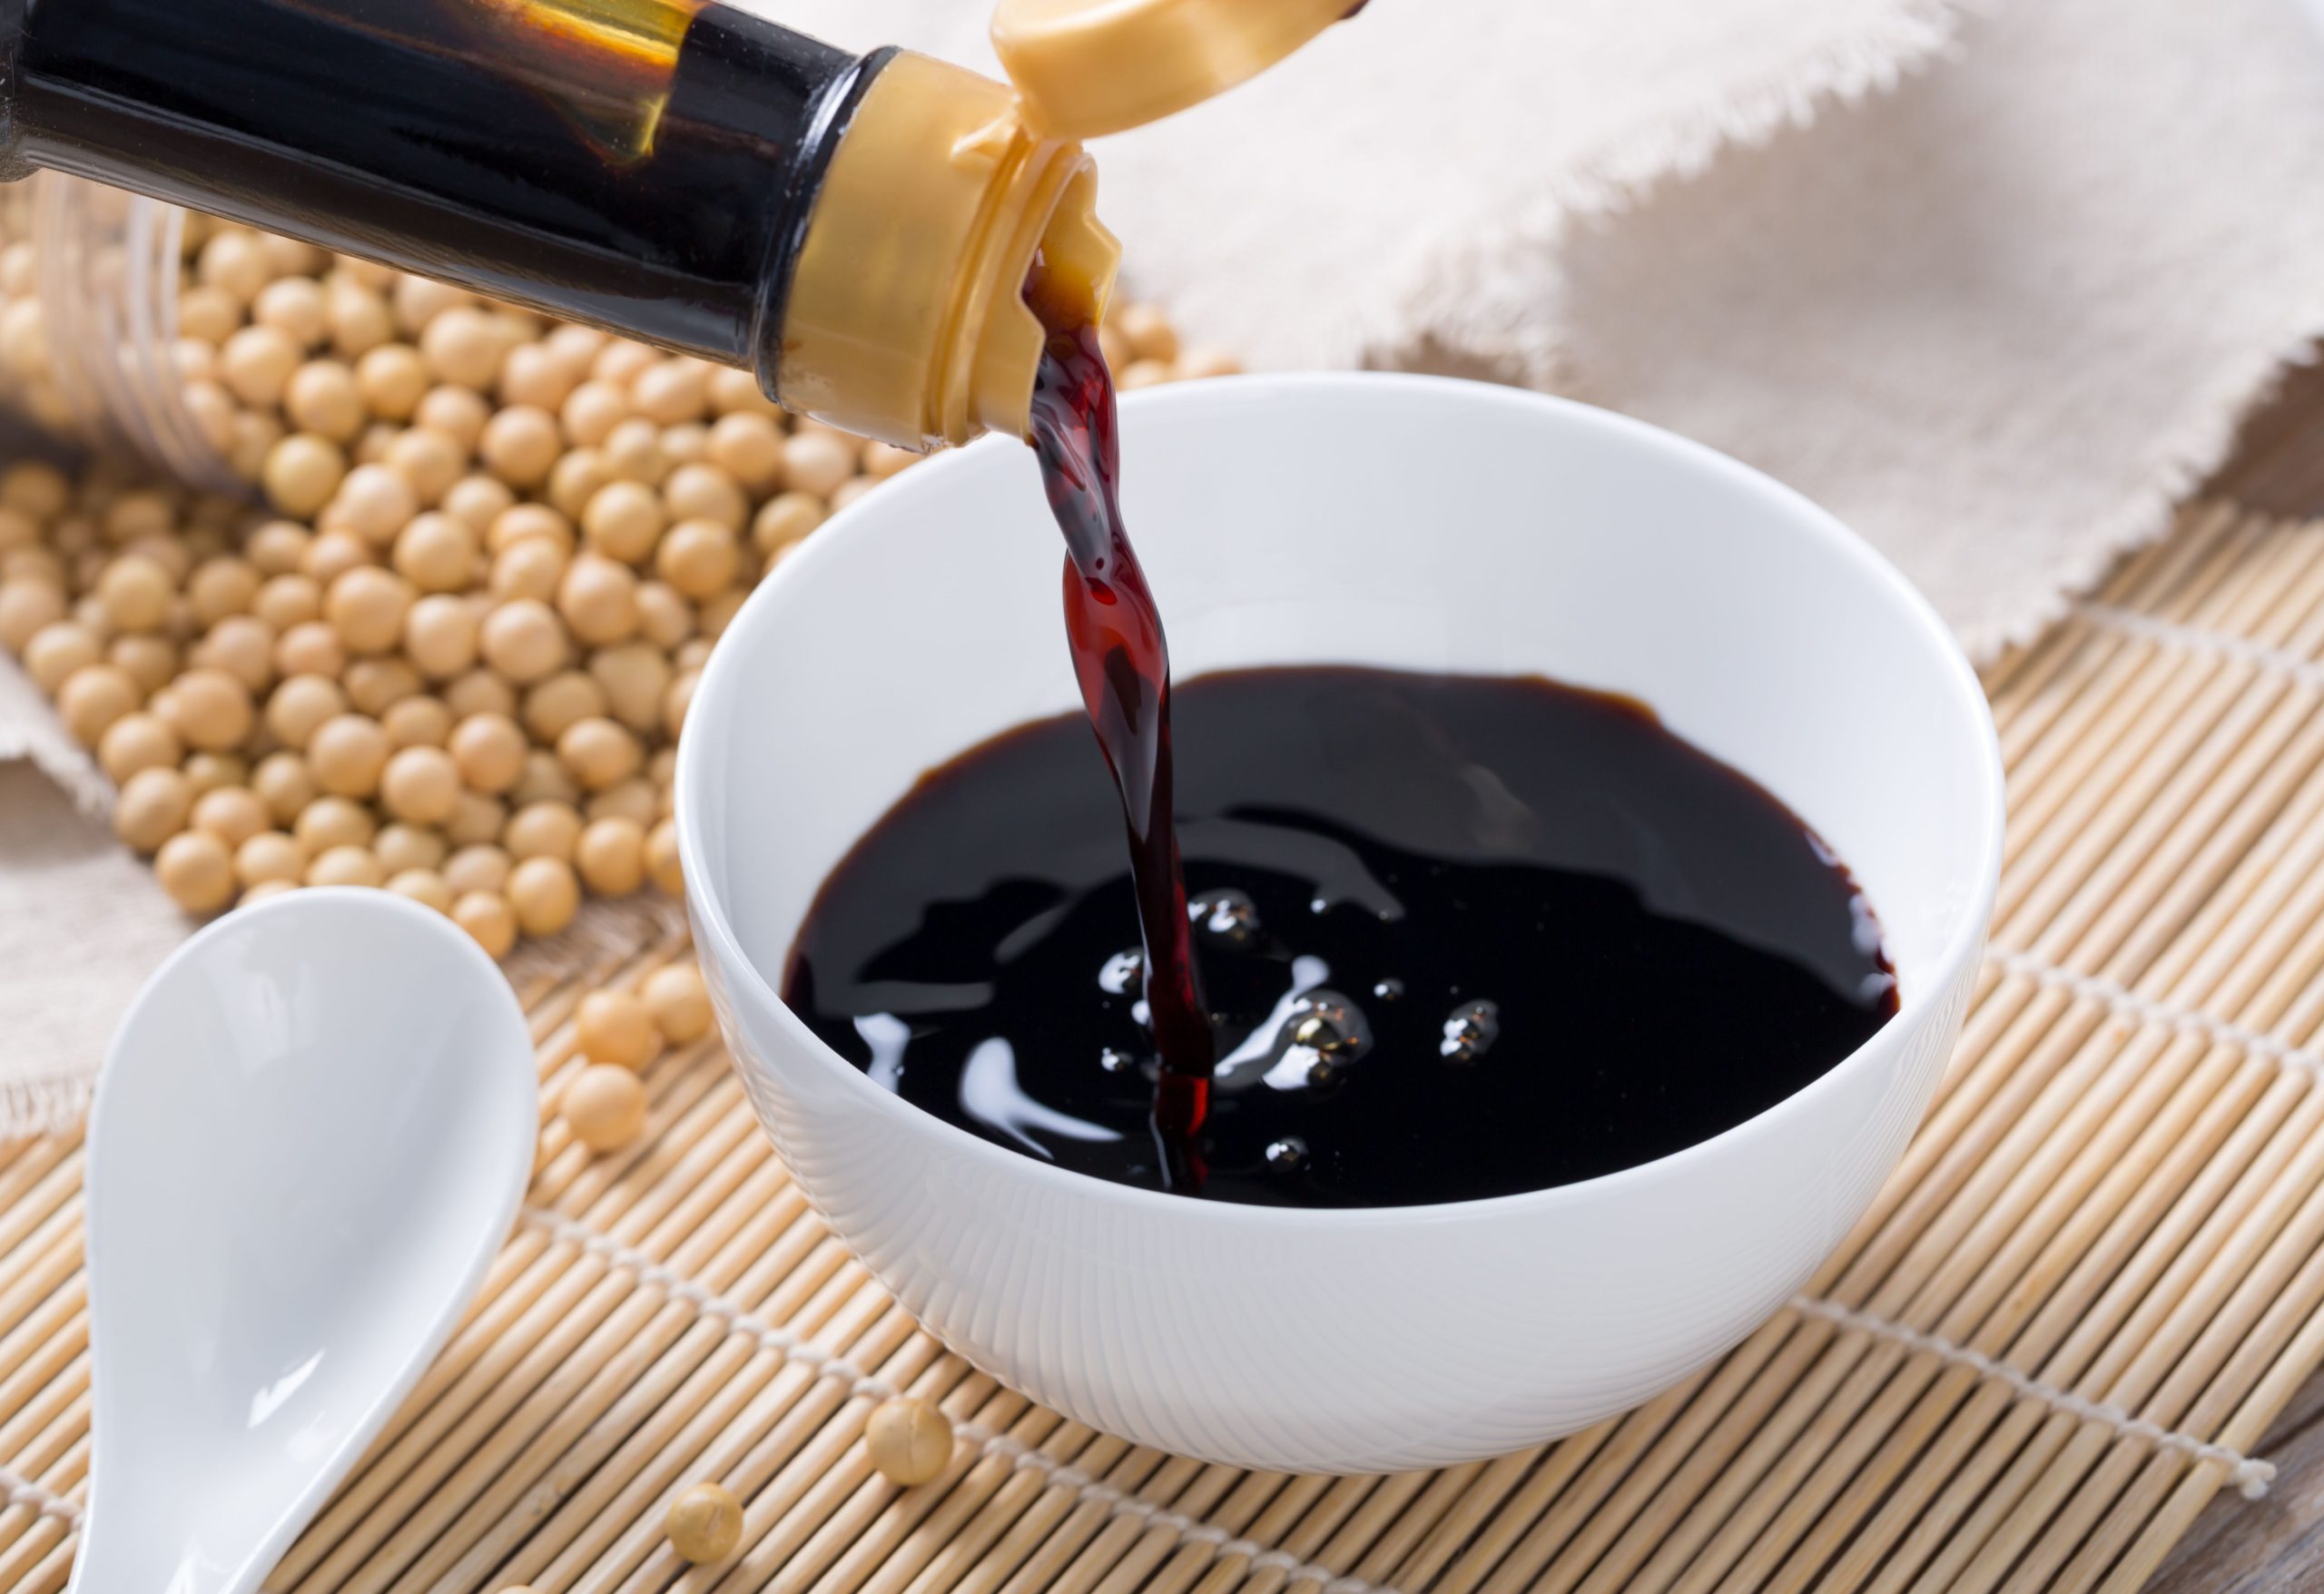 getty_pouring_soy_sauce_-scaled.jpg